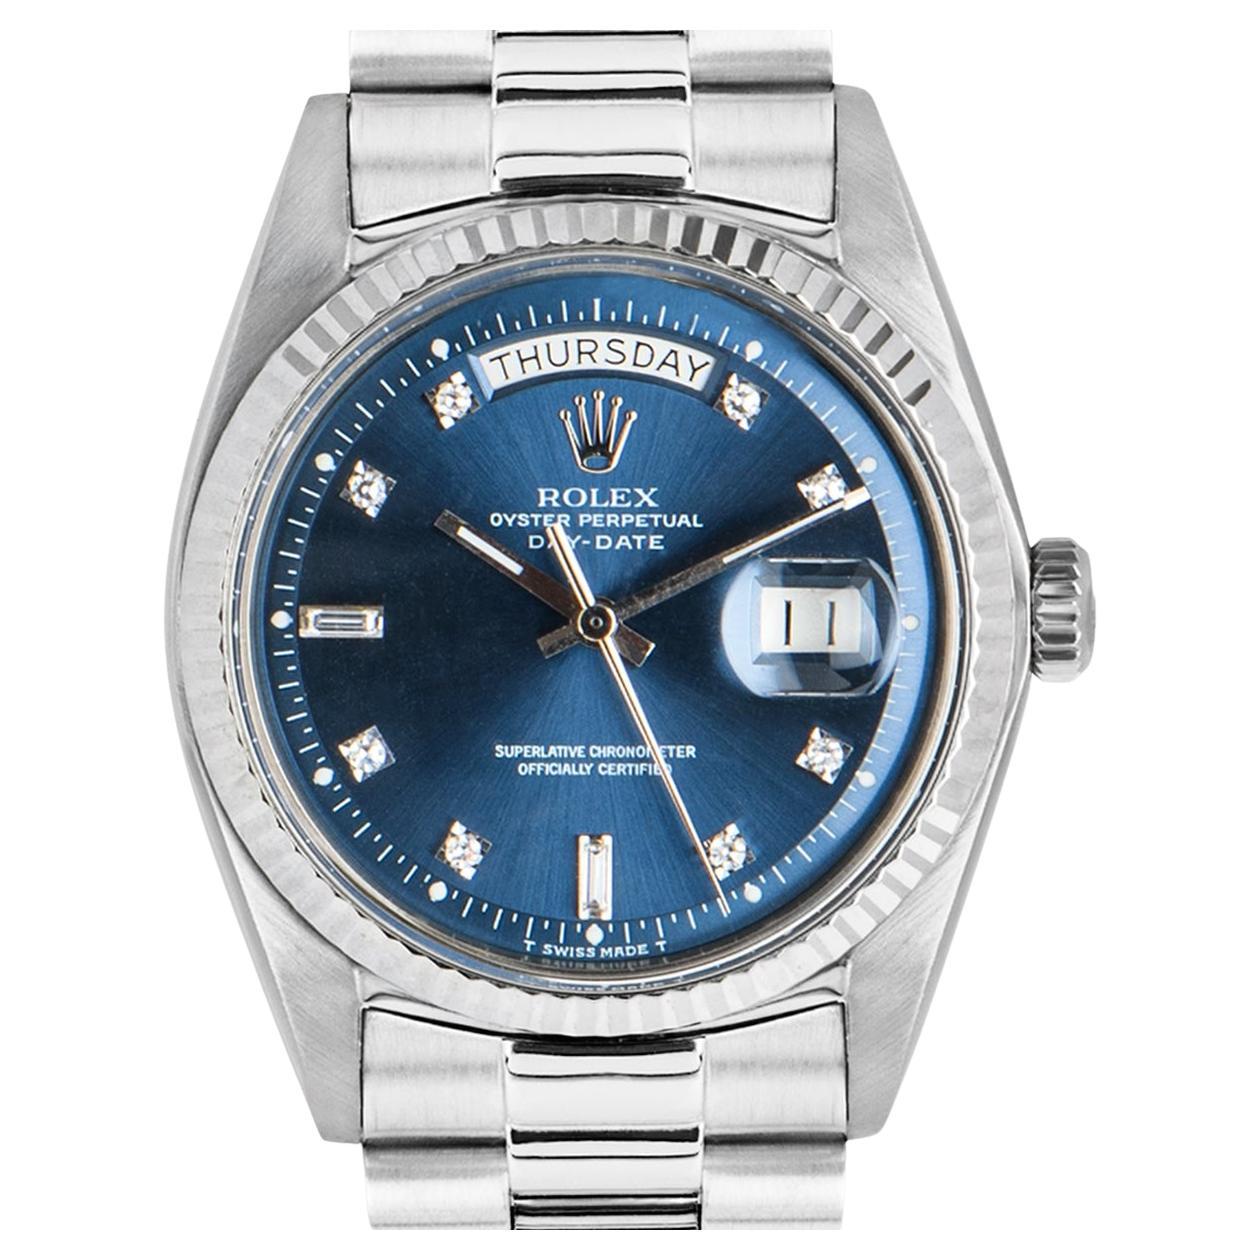 An 18k white gold Day-Date men's wristwatch, by Rolex.

The iconic day and date apertures are showcased on a blue dial, which is set with a mix of round brilliant cut and baguette cut diamond hour markers. Complementing the dial is a plastic glass